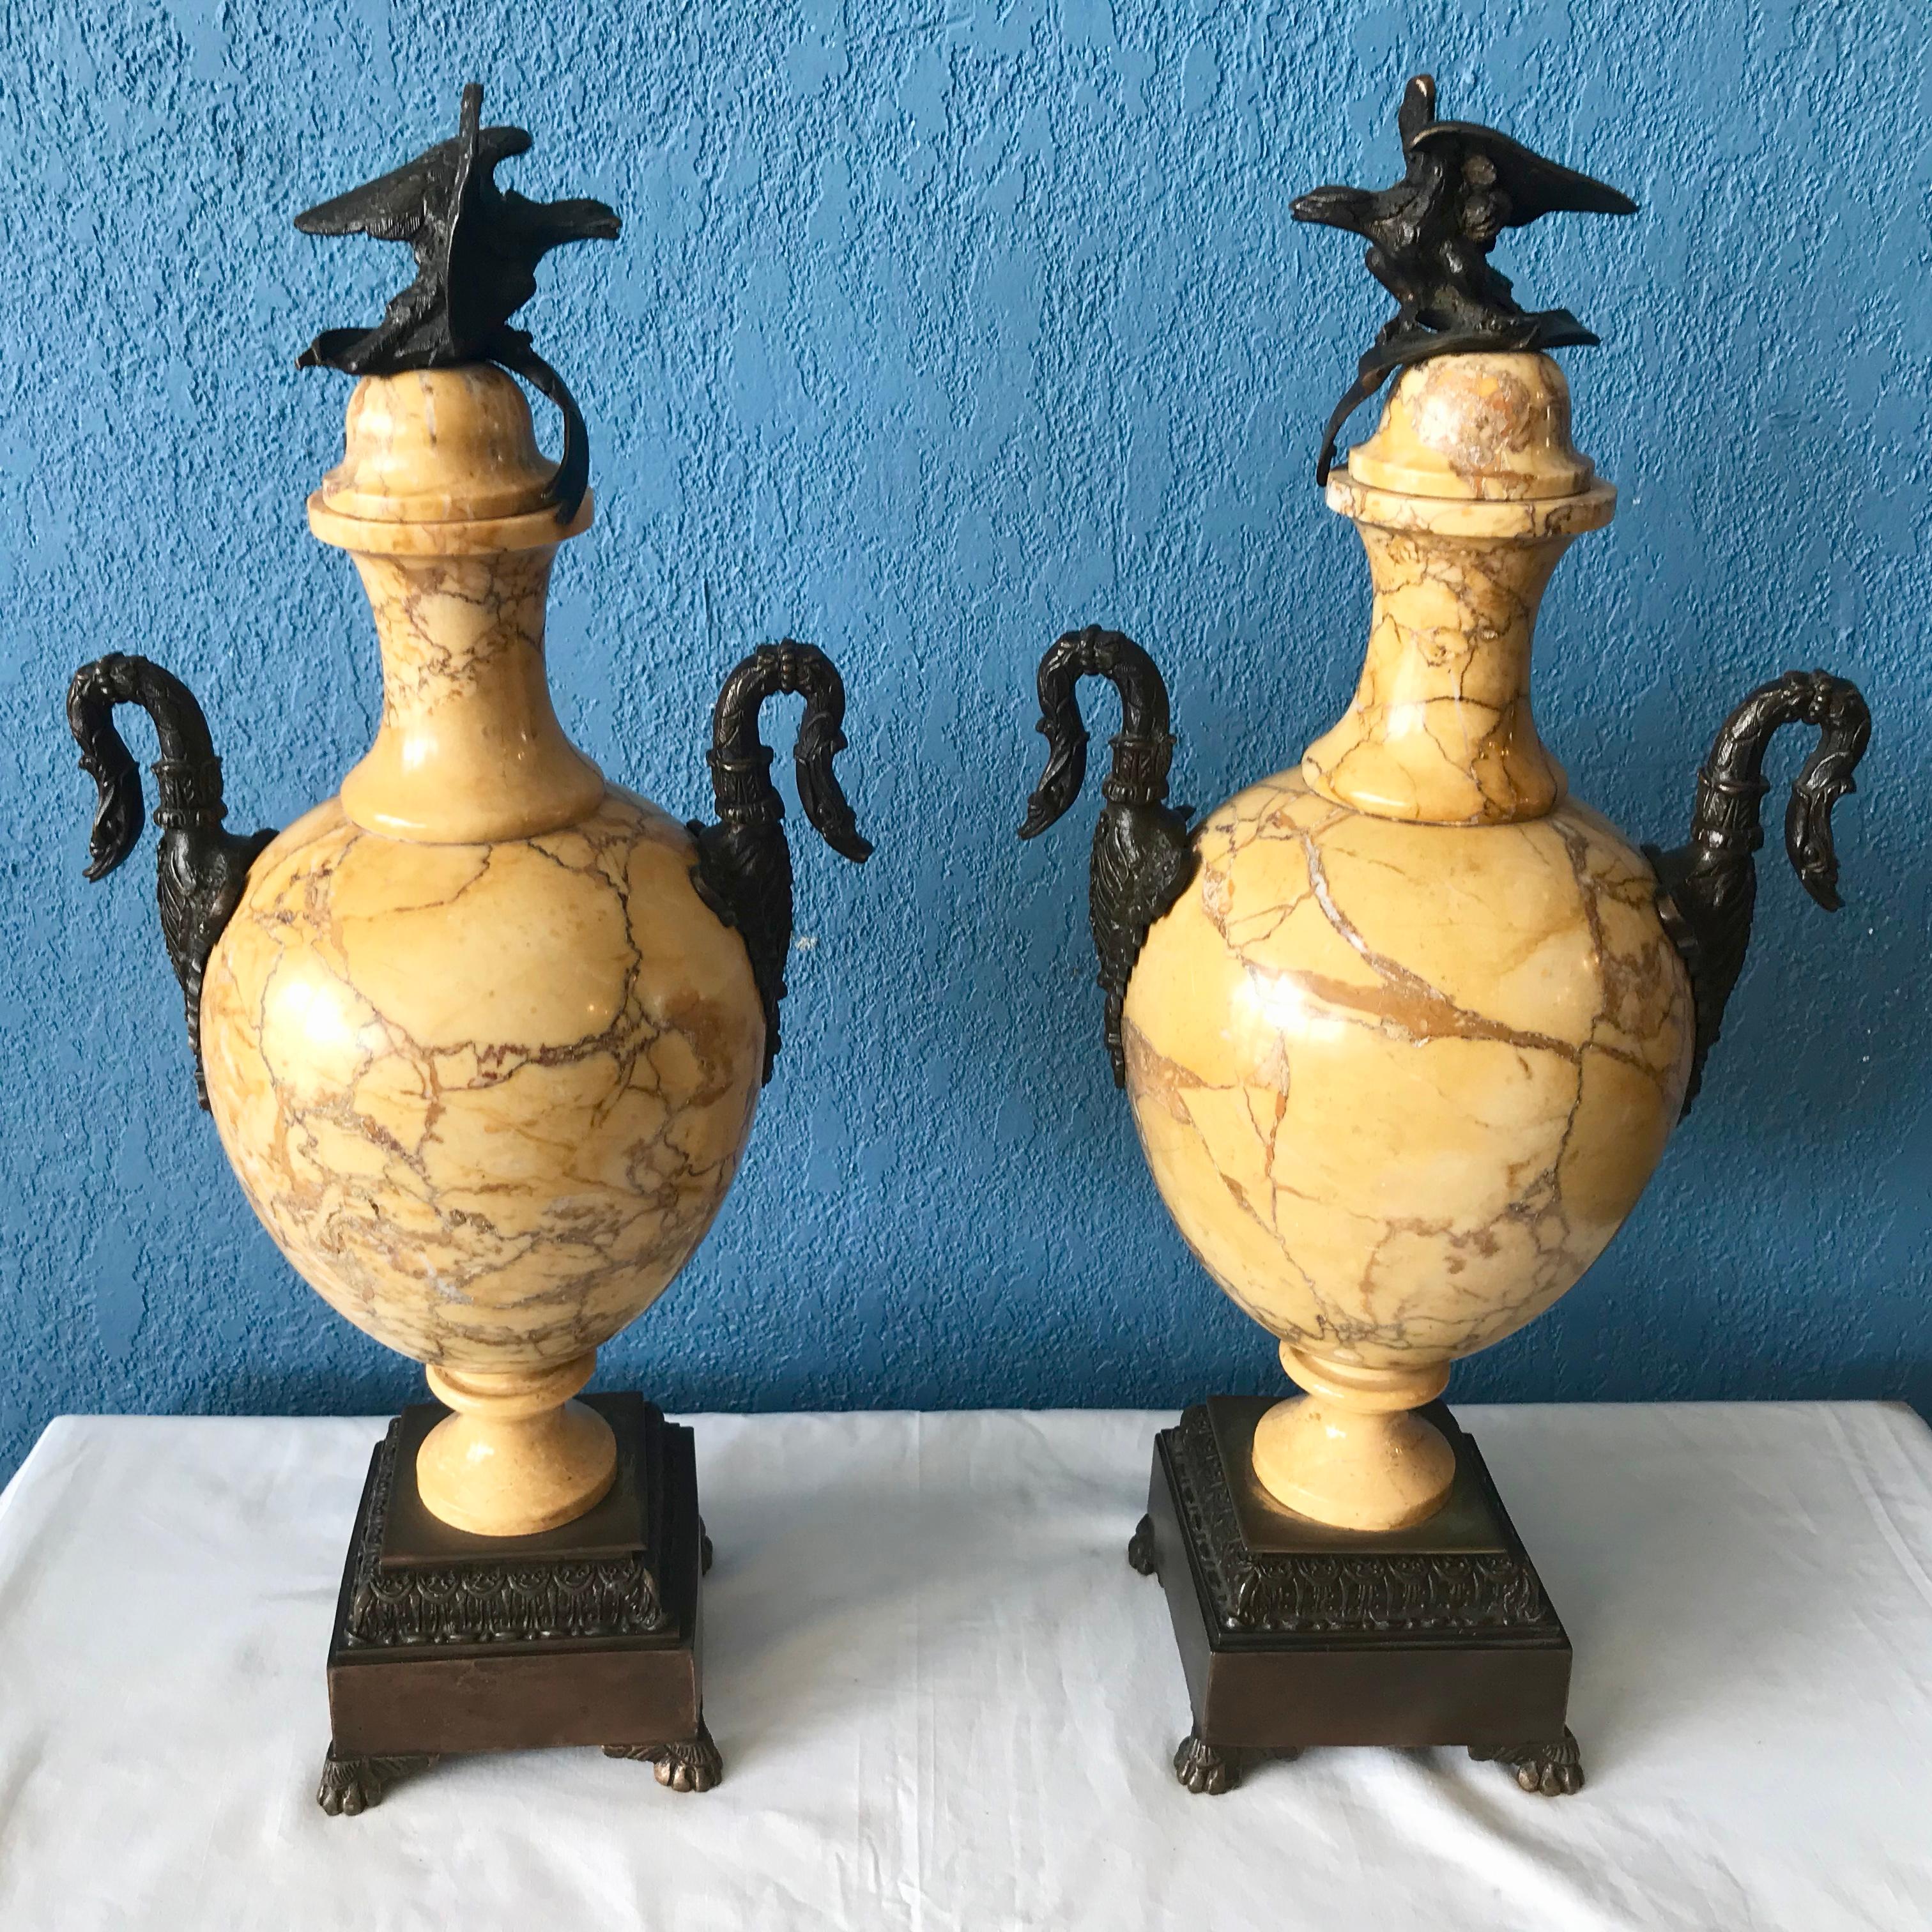 Pair of 19th Century Sienna Marble and Bronze Urns In Good Condition For Sale In West Palm Beach, FL